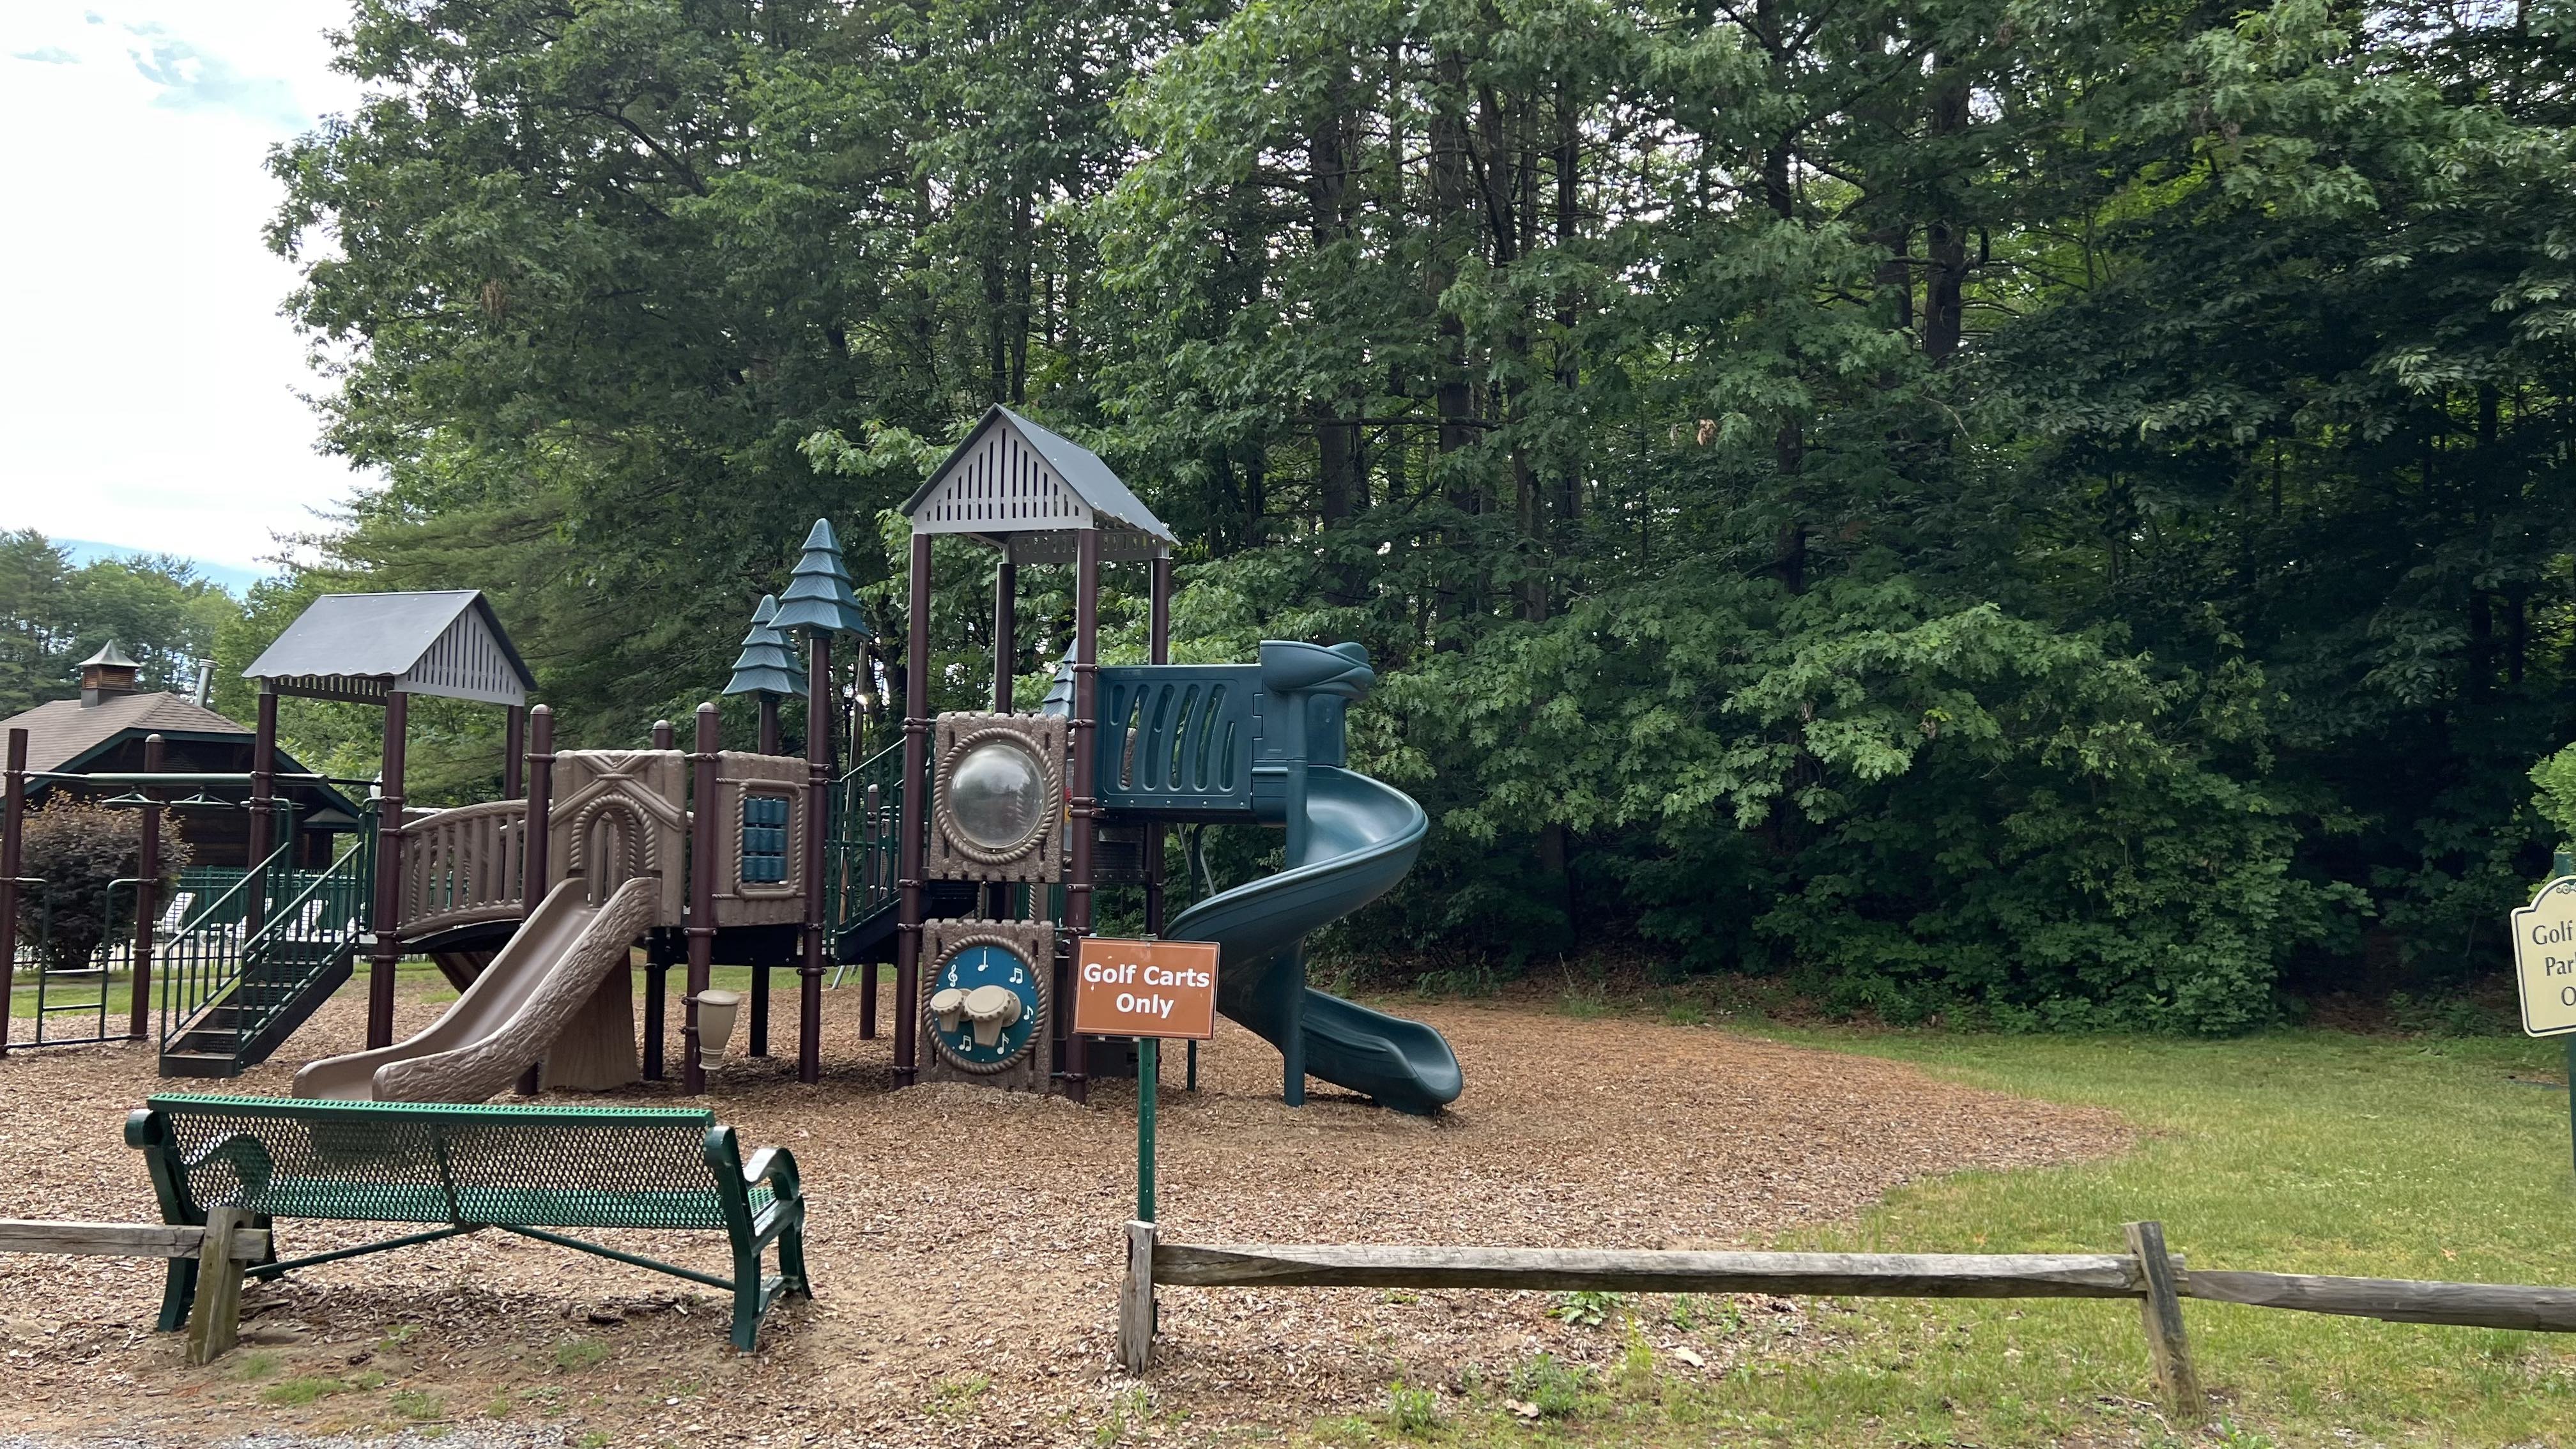 play area for children at the campground